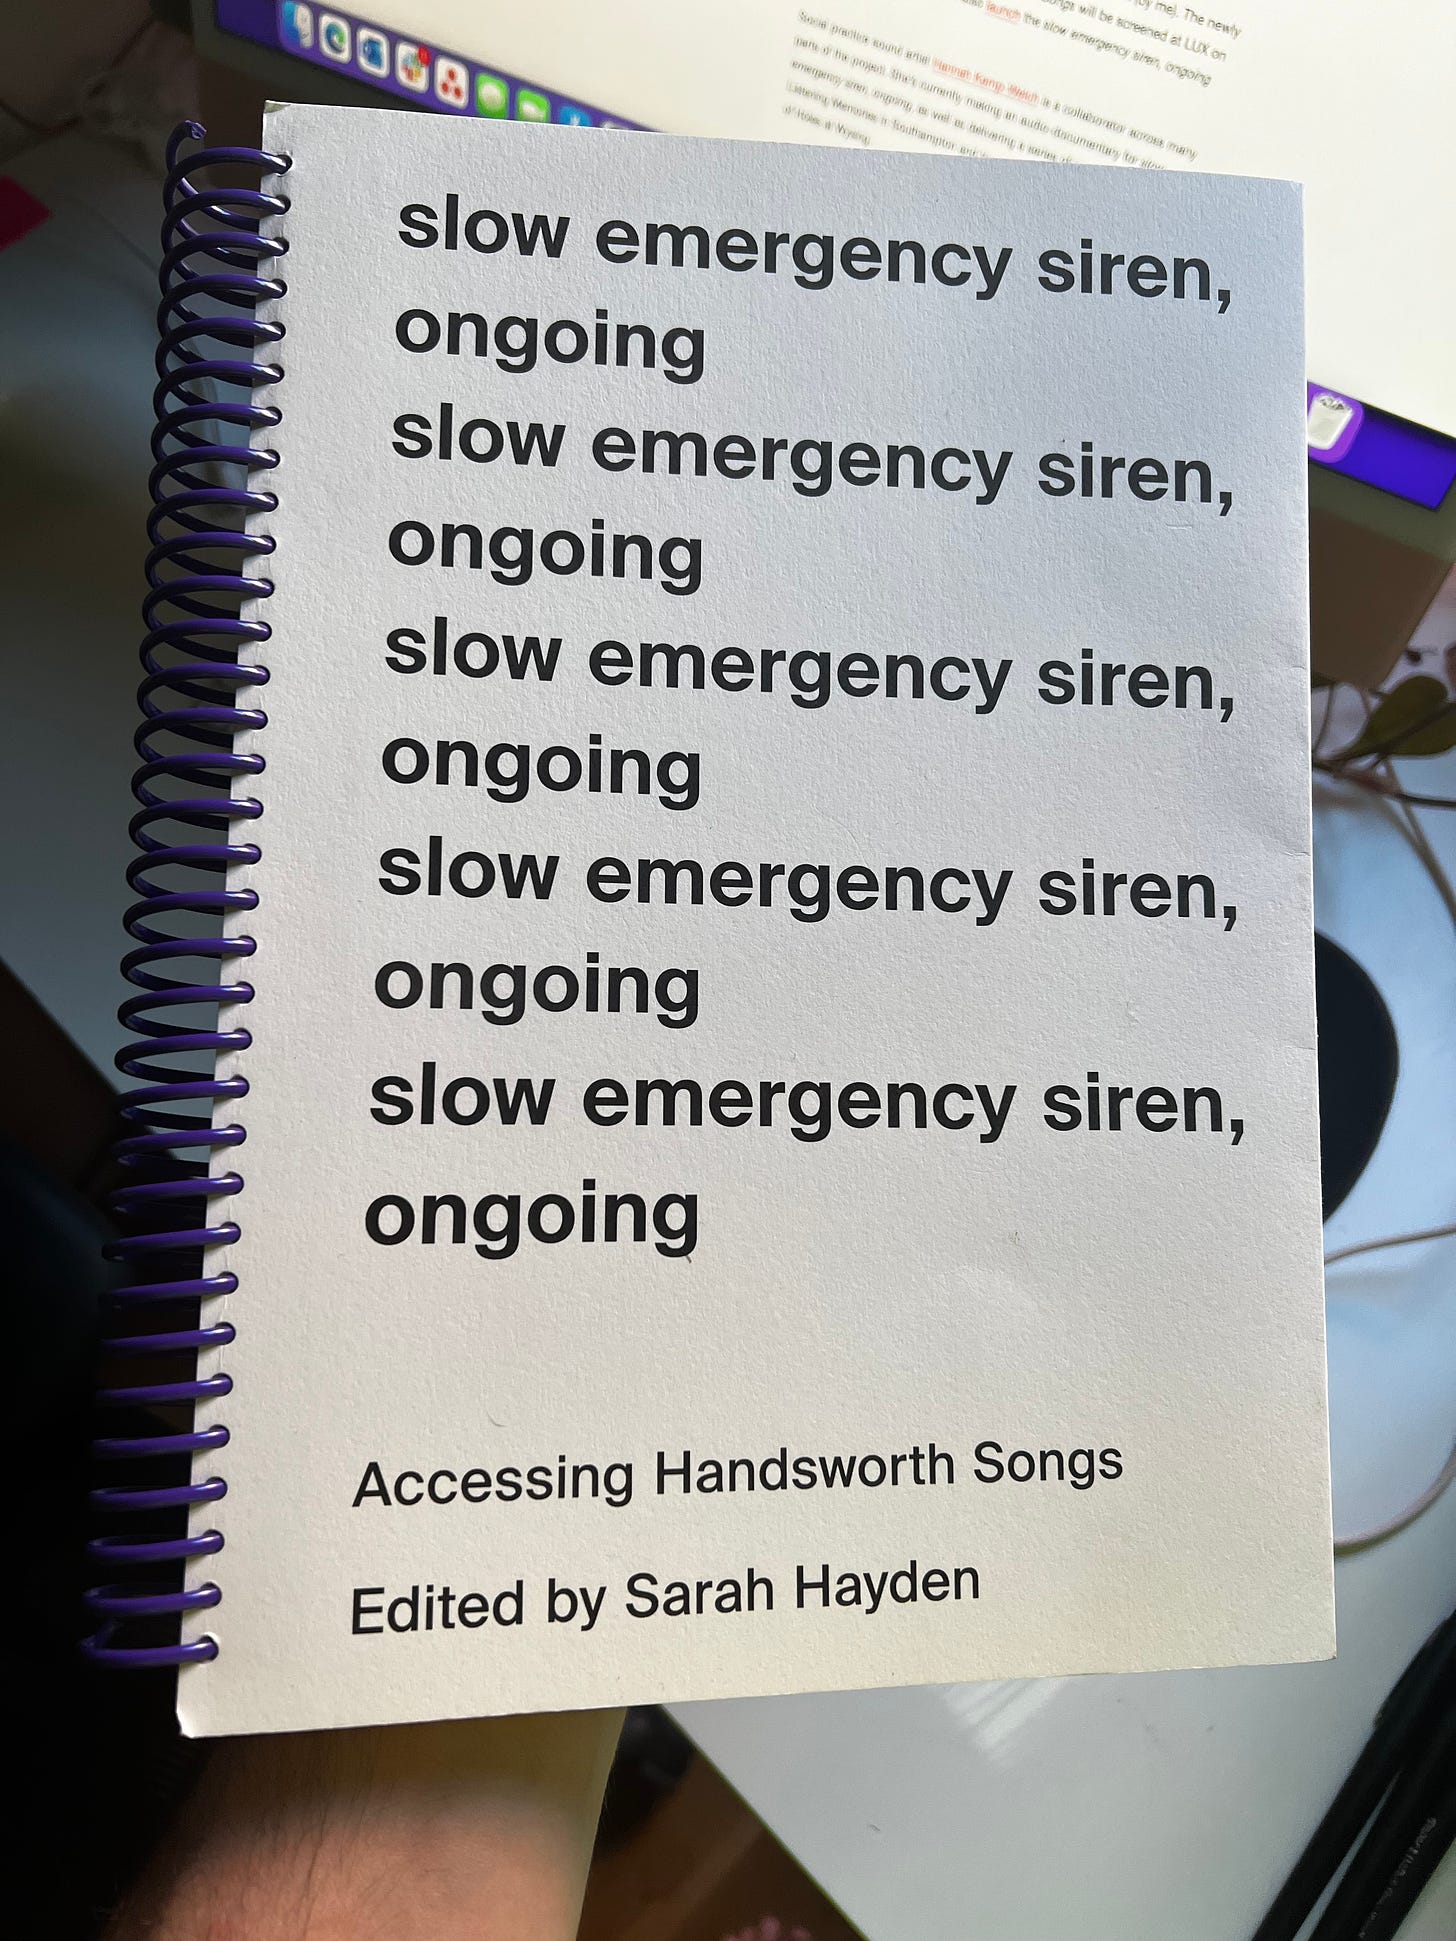 I’m holding a book with a purple spiral binding. Black bold, lower-case text repeats the title: slow emergency siren, ongoing. At the bottom, smaller: Accessing Handsworth Songs / Edited by Sarah Hayden.